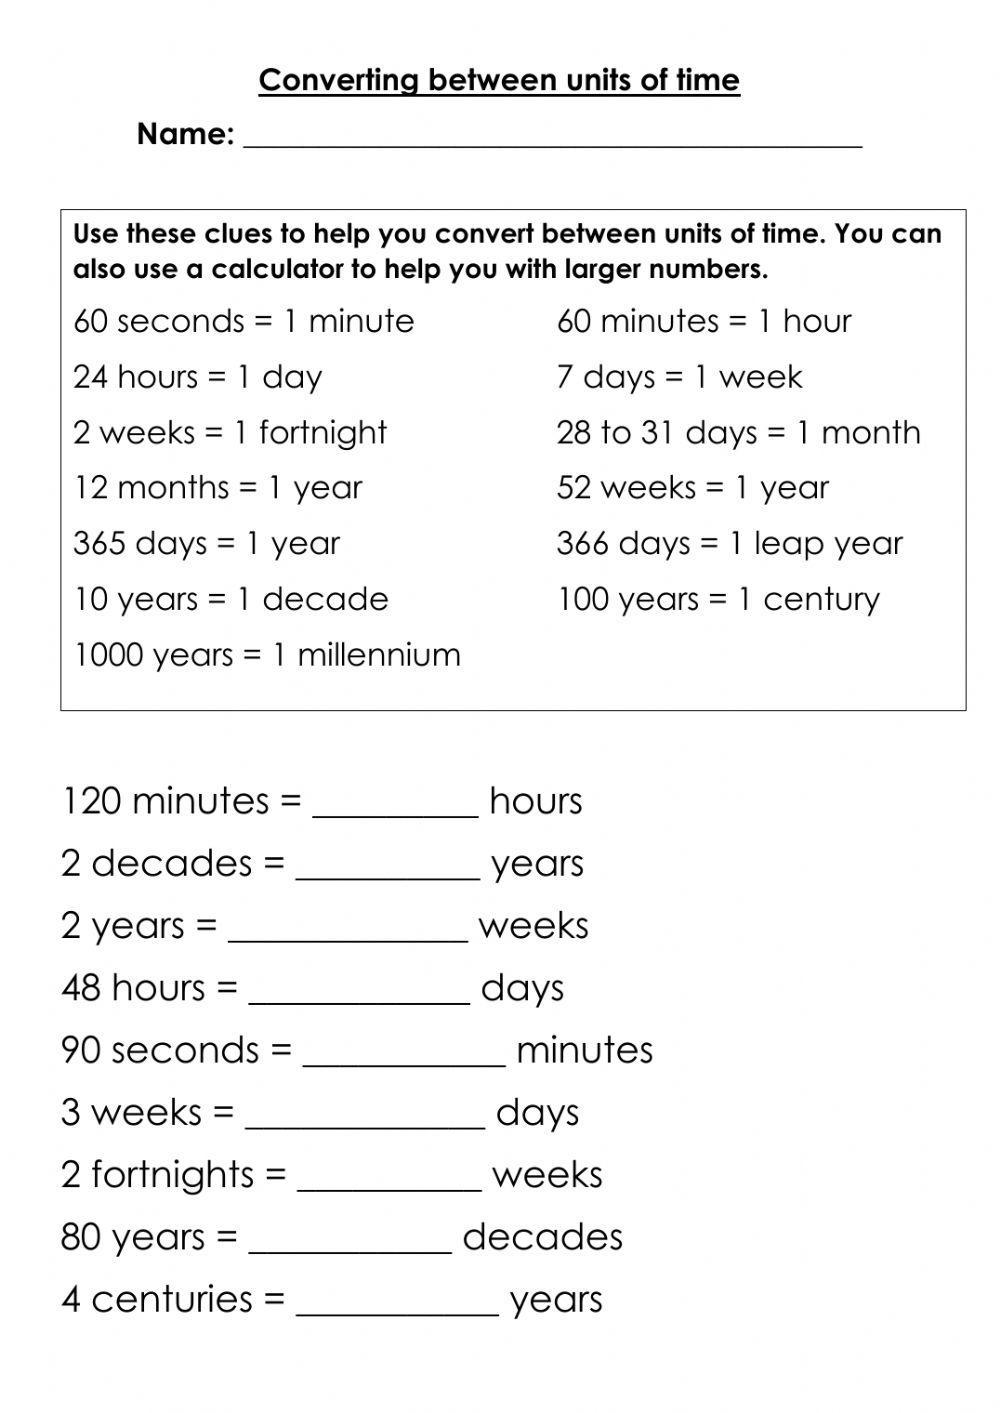 Converting Units of Time